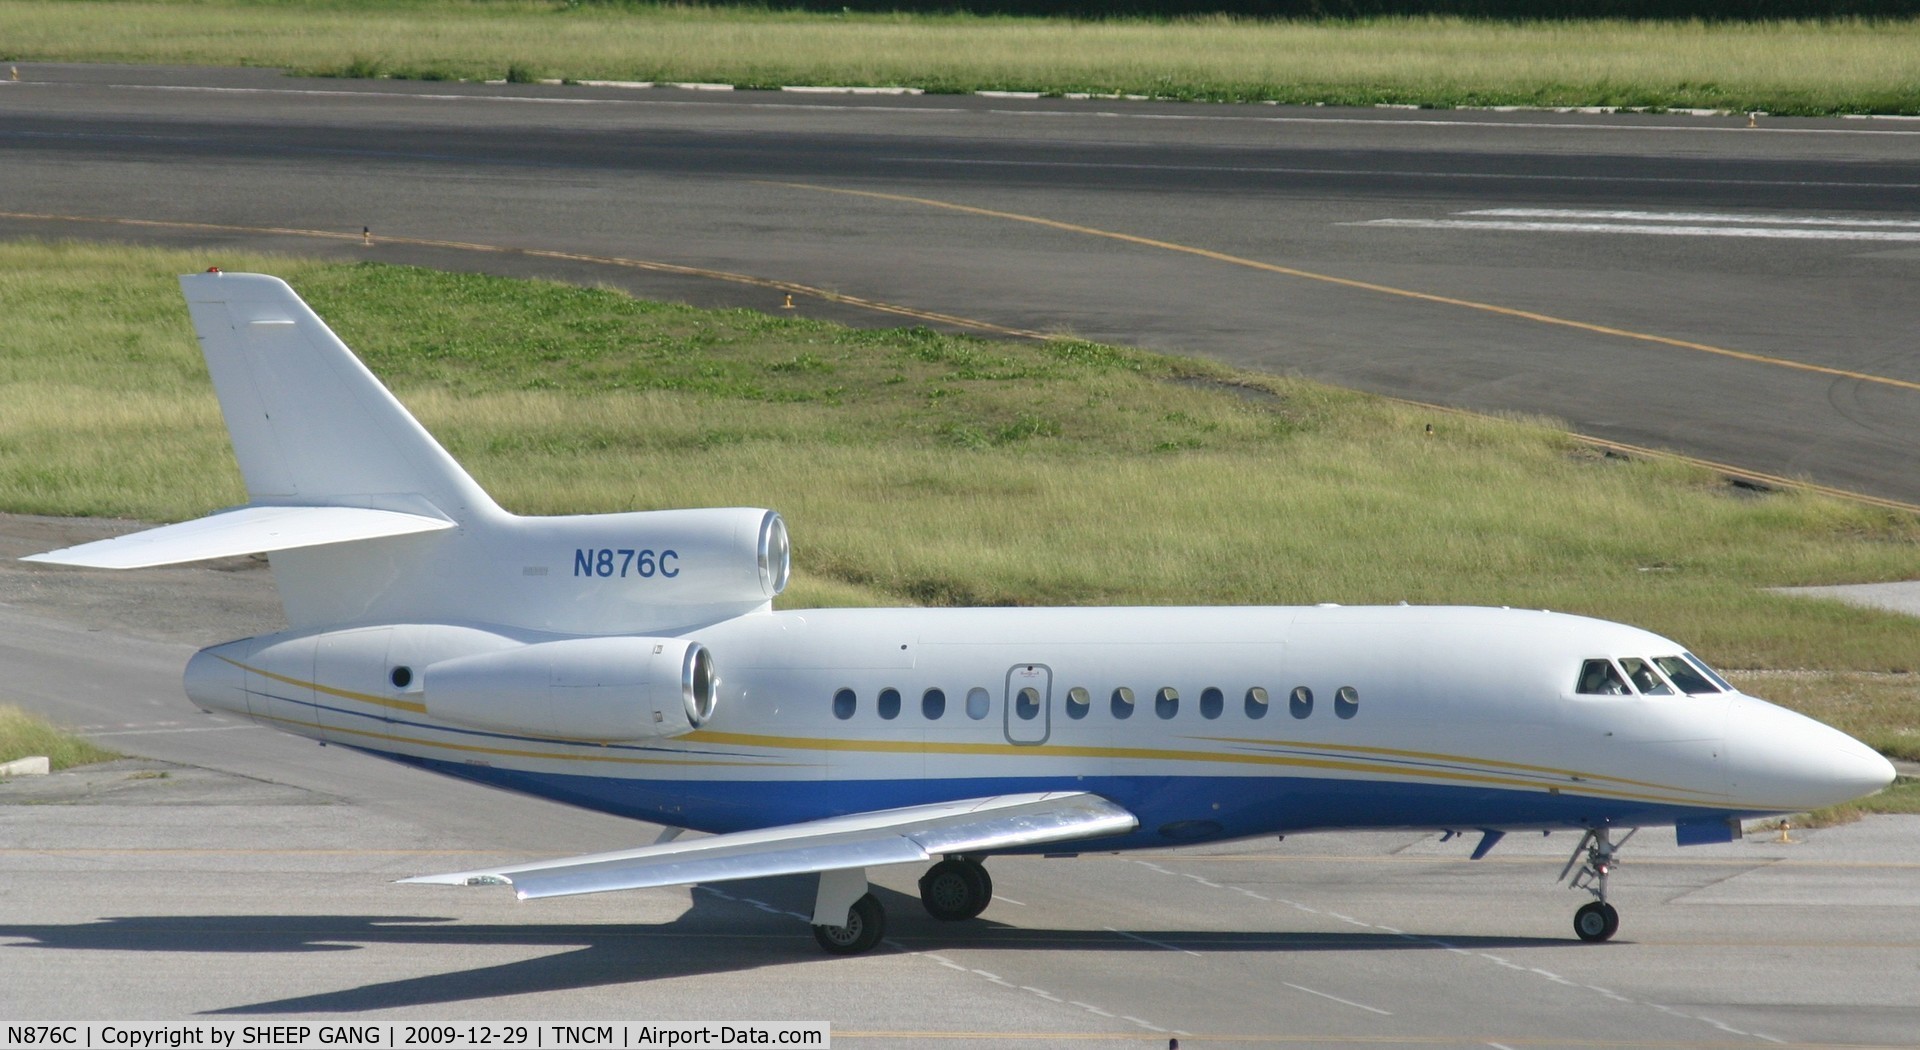 N876C, 2006 Dassault Falcon 900EX C/N 162, N876C taxing to ALpha for take off